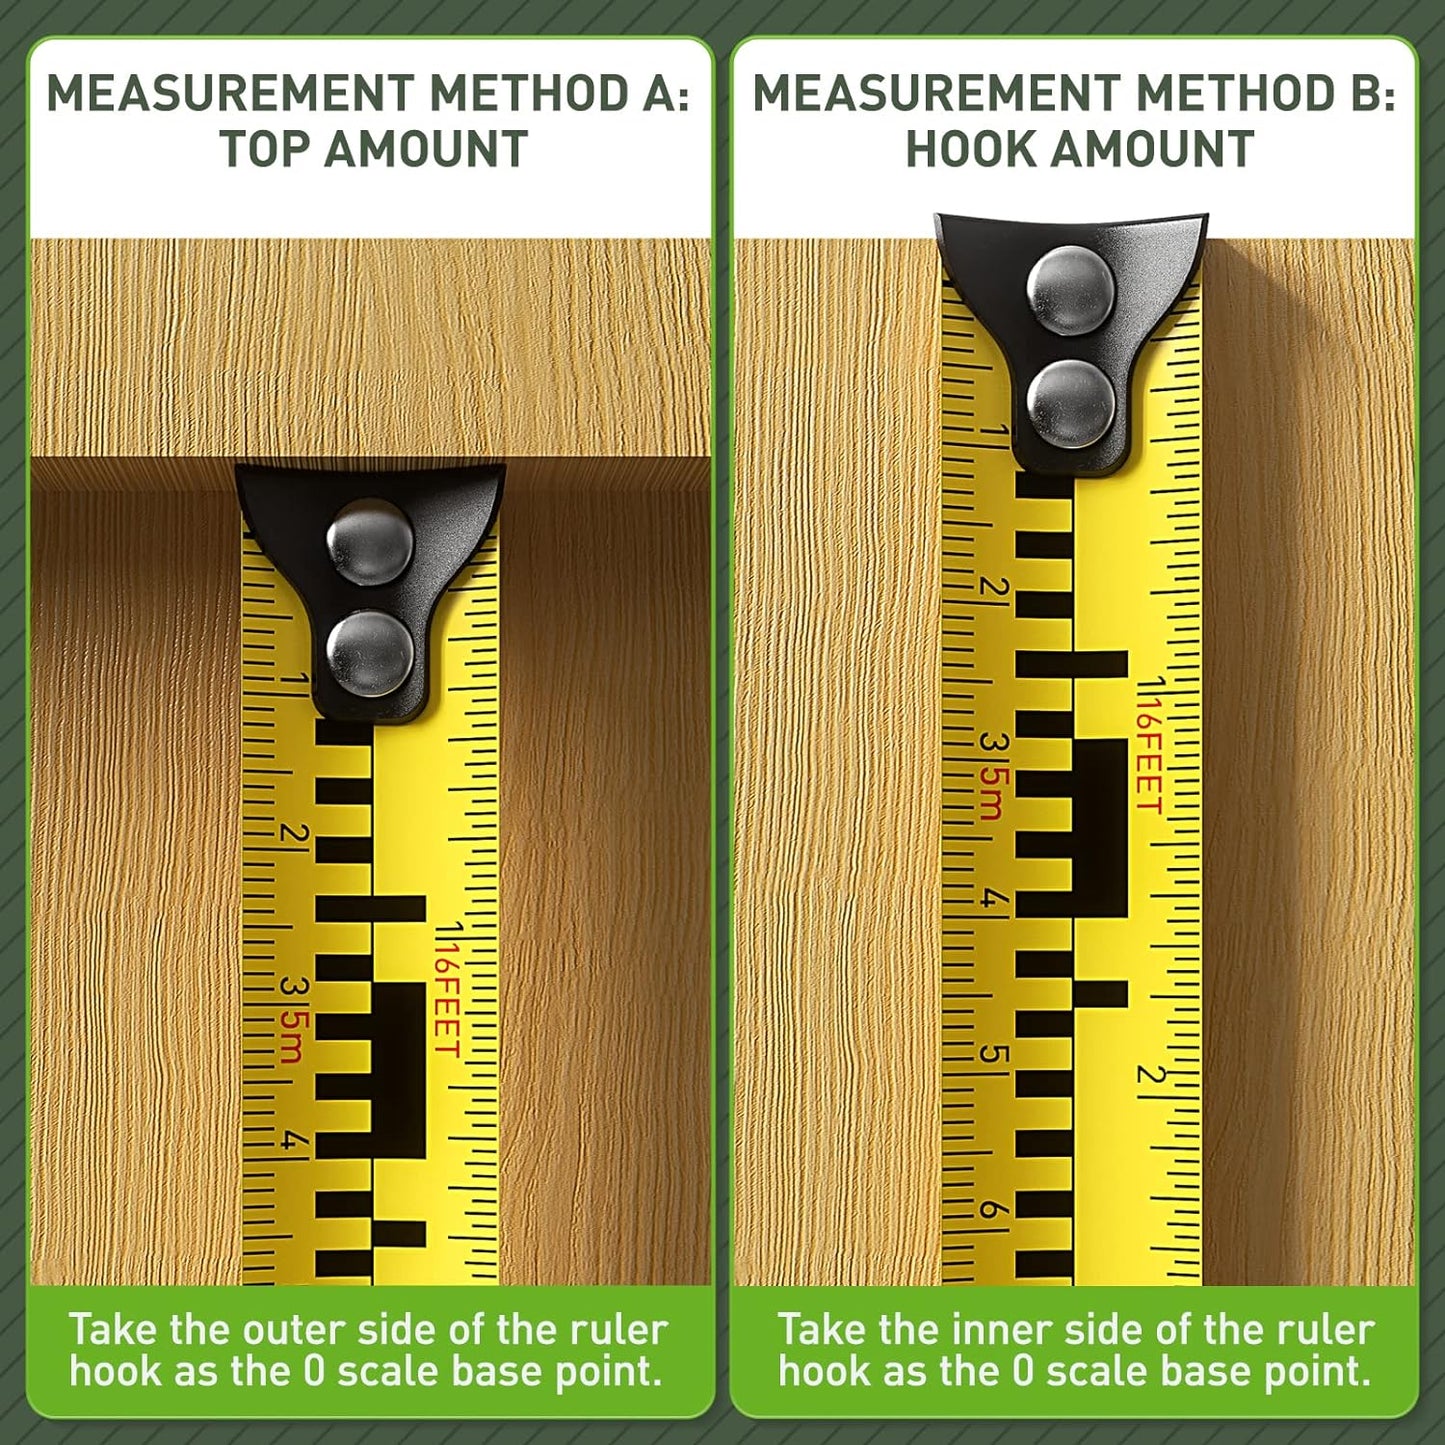 197FT TAPE MEASURE WITH LASER